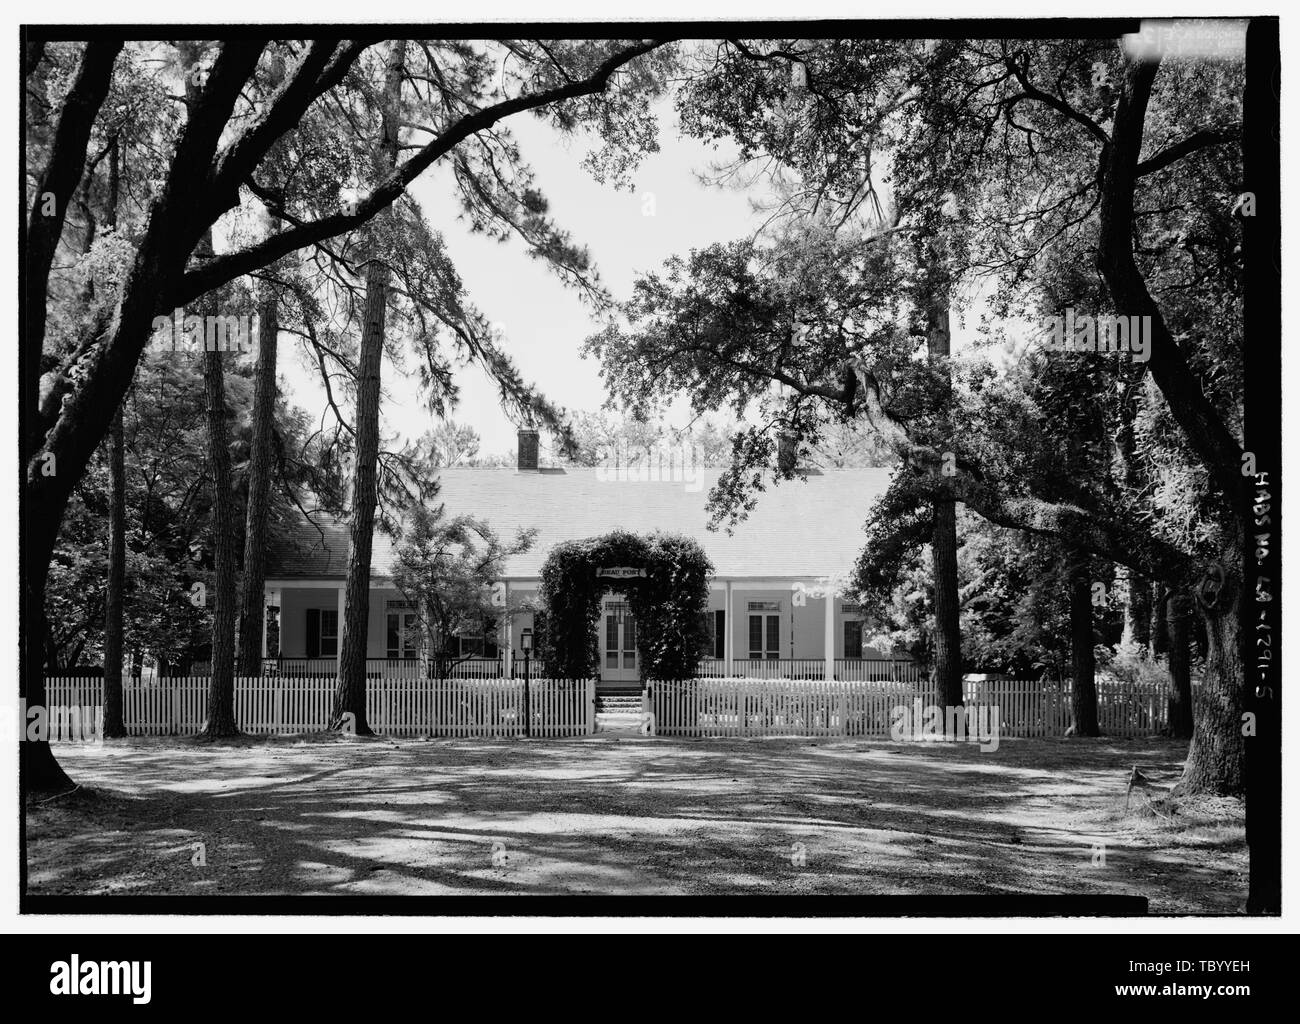 North elevation, with scale  Beau Fort, 4055 State Highway 494, Natchez, Natchitoches Parish, LA Prudhomme, Narcisse Cloutier family Louisiana Tech University School of Architecture, sponsor Carwile, Guy W, faculty sponsor Morgan, Nancy I, M, sponsor Cane River National Heritage Area Commission, sponsor Price, Virginia Barrett, transmitter Austin, Mandi, delineator Carter, Jessica, delineator Cooper, Christopher, delineator Dillehay, Shannon, delineator Harris, Christopher, delineator Lesur, Rene, delineator Linzay, Kristopher, delineator McCollum, Eric, delineator Richard, Geneen, delineator  Stock Photo